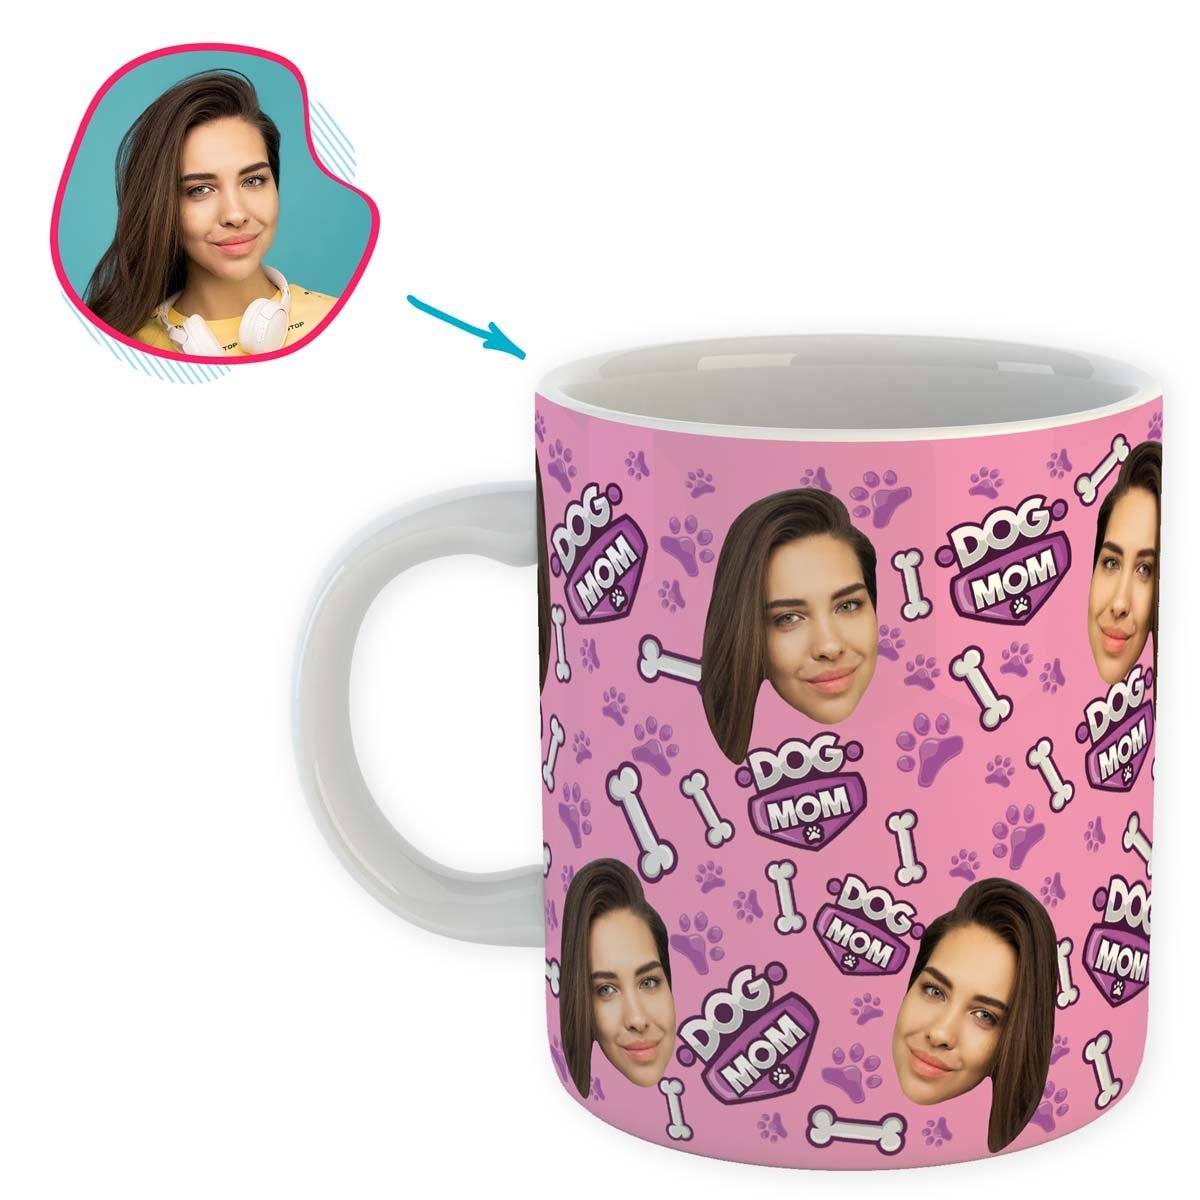 pink Dog Mom mug personalized with photo of face printed on it